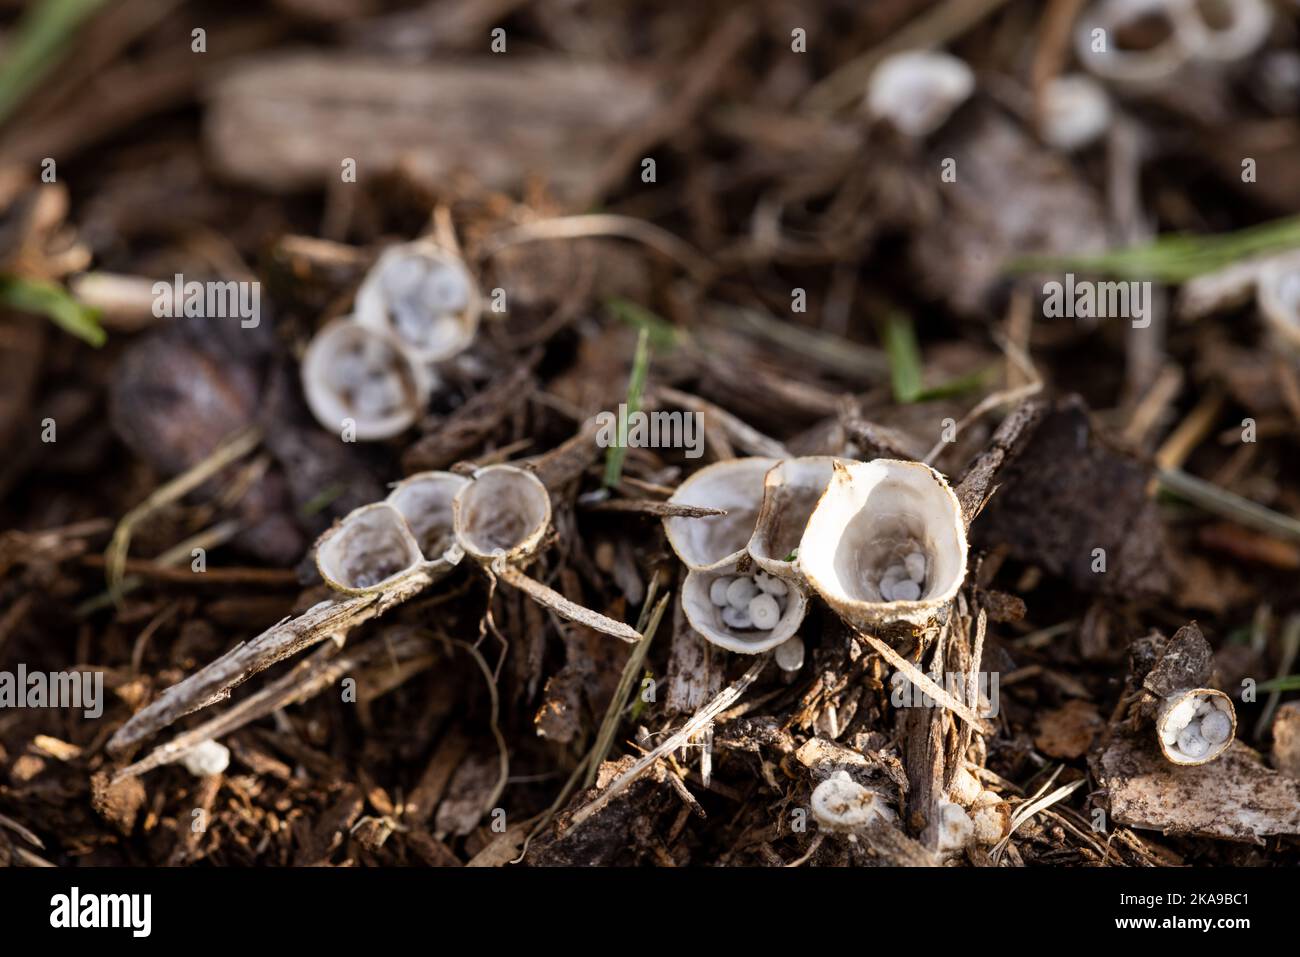 Bird's Nest Fungus or Nidulariaceae resembles tiny bird's nests. It feeds on decomposing organic matter in gardens or forest. Stock Photo